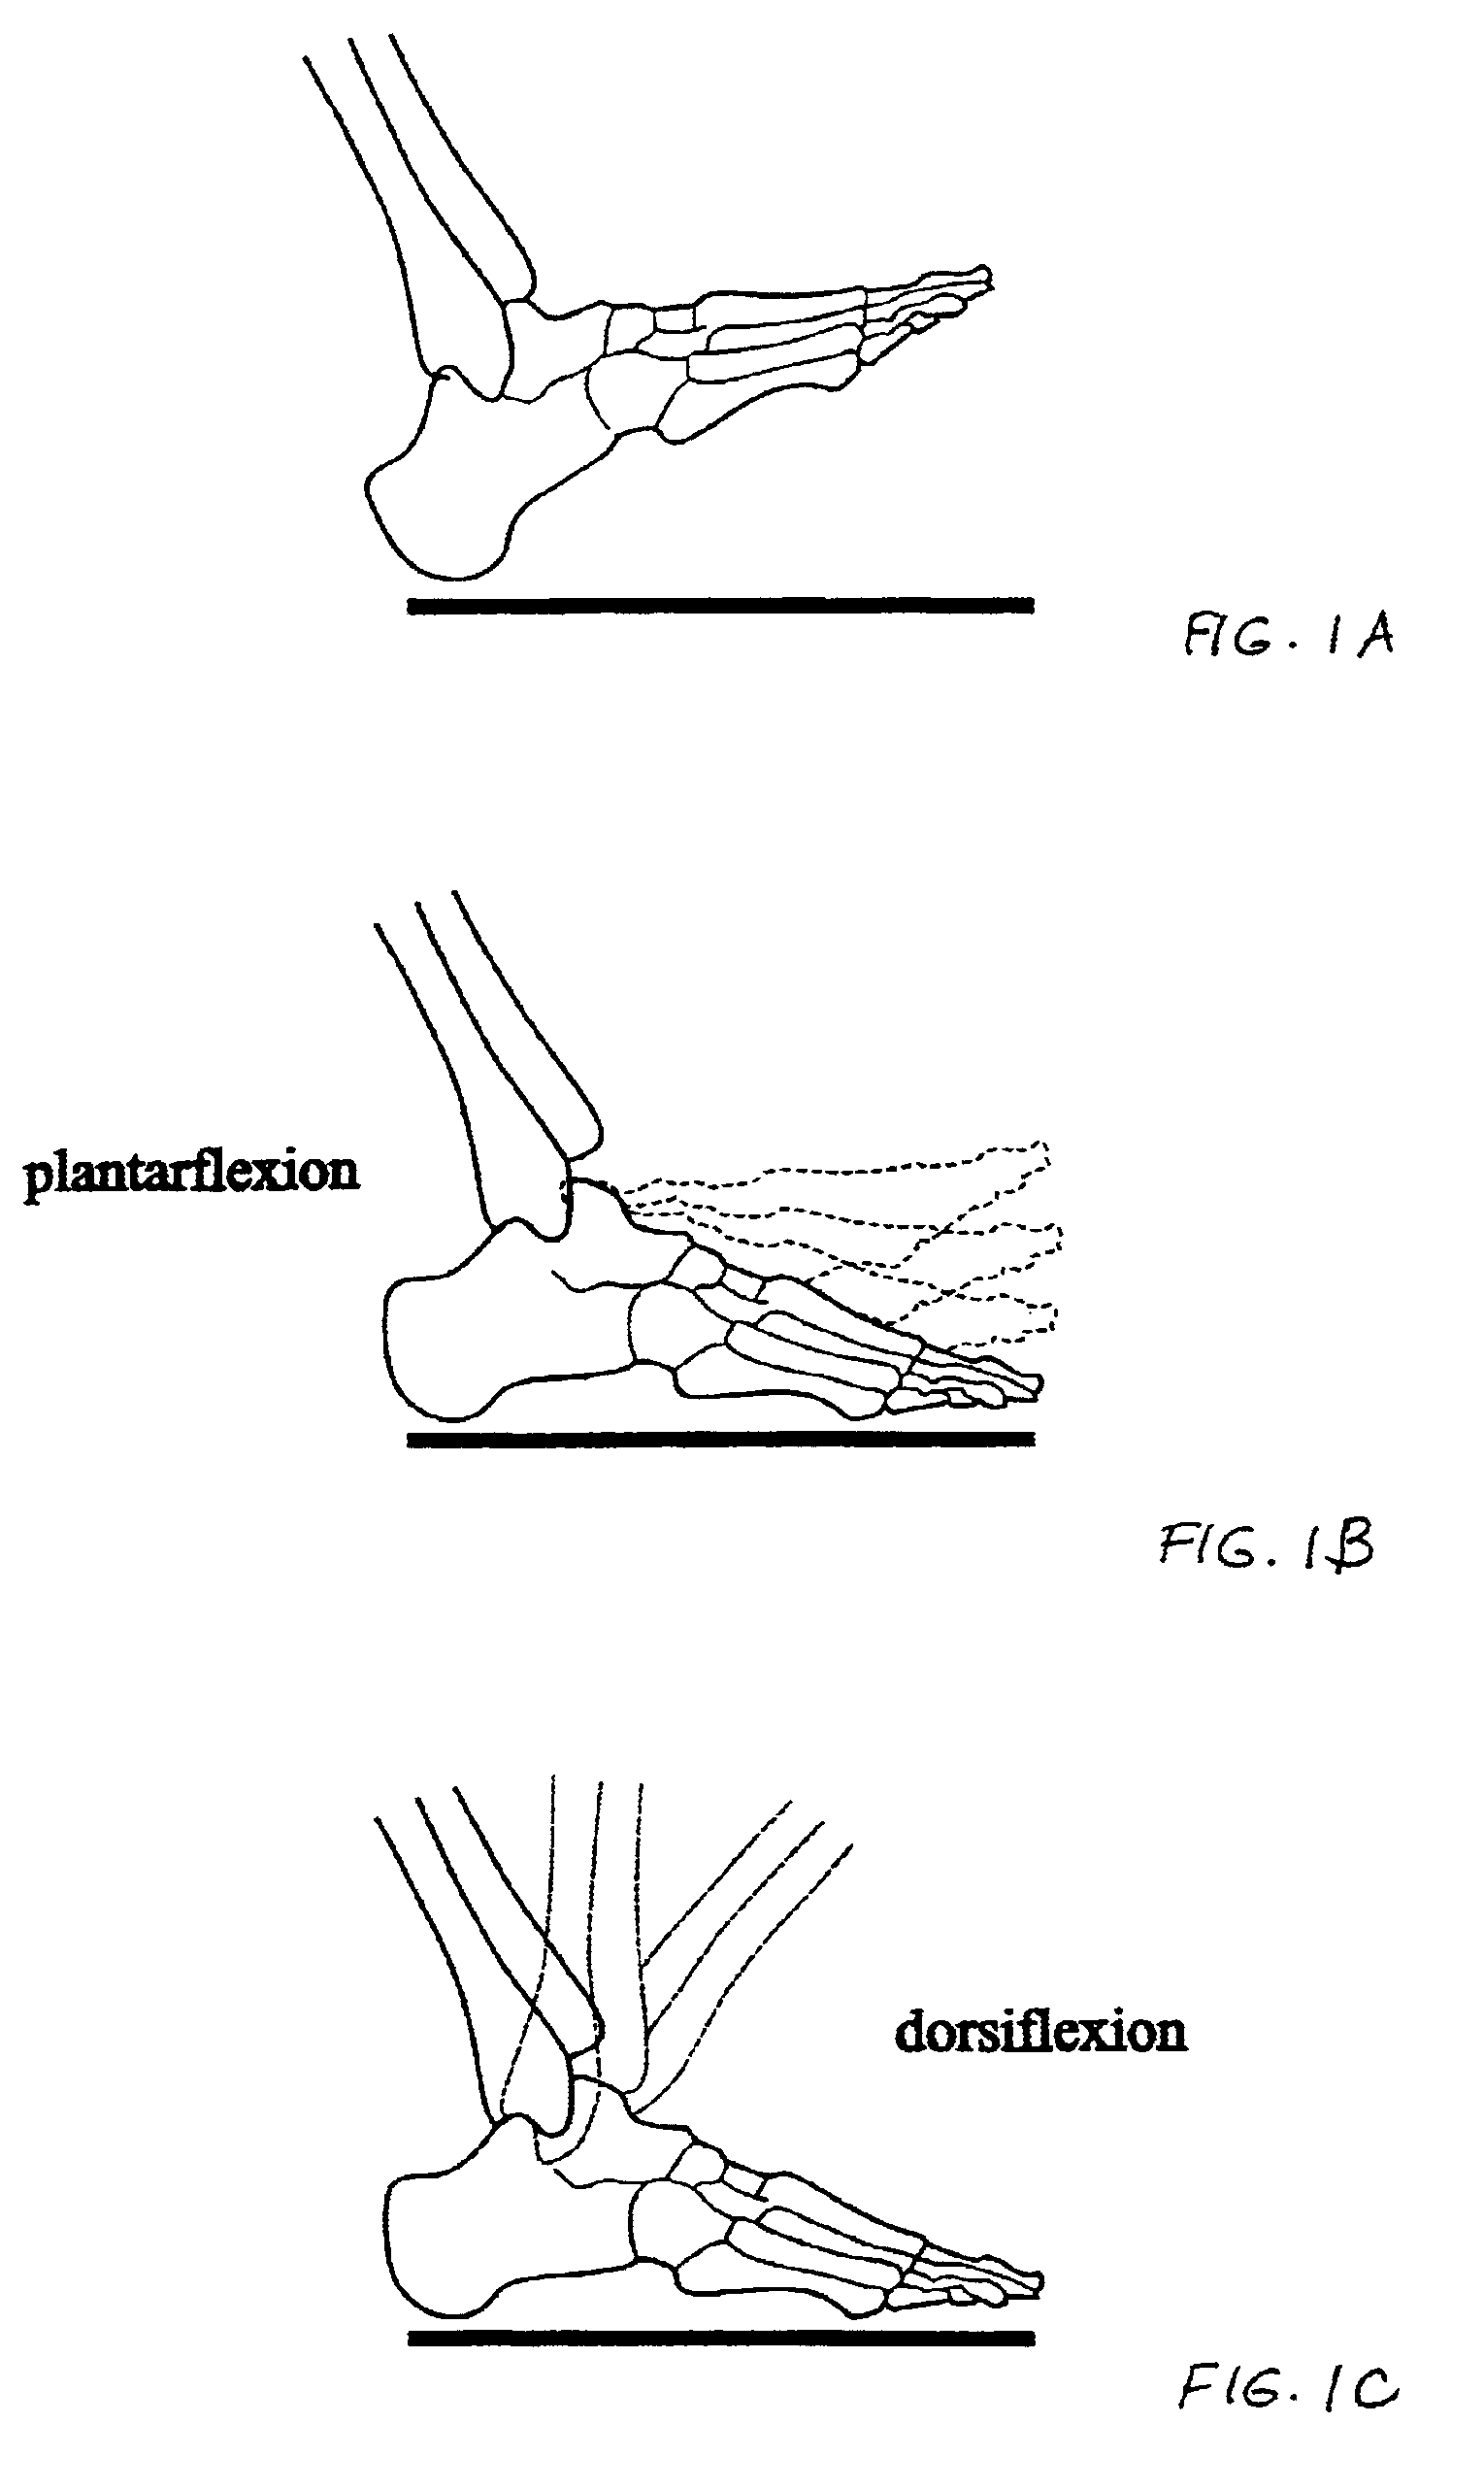 Footwear with impact absorbing system